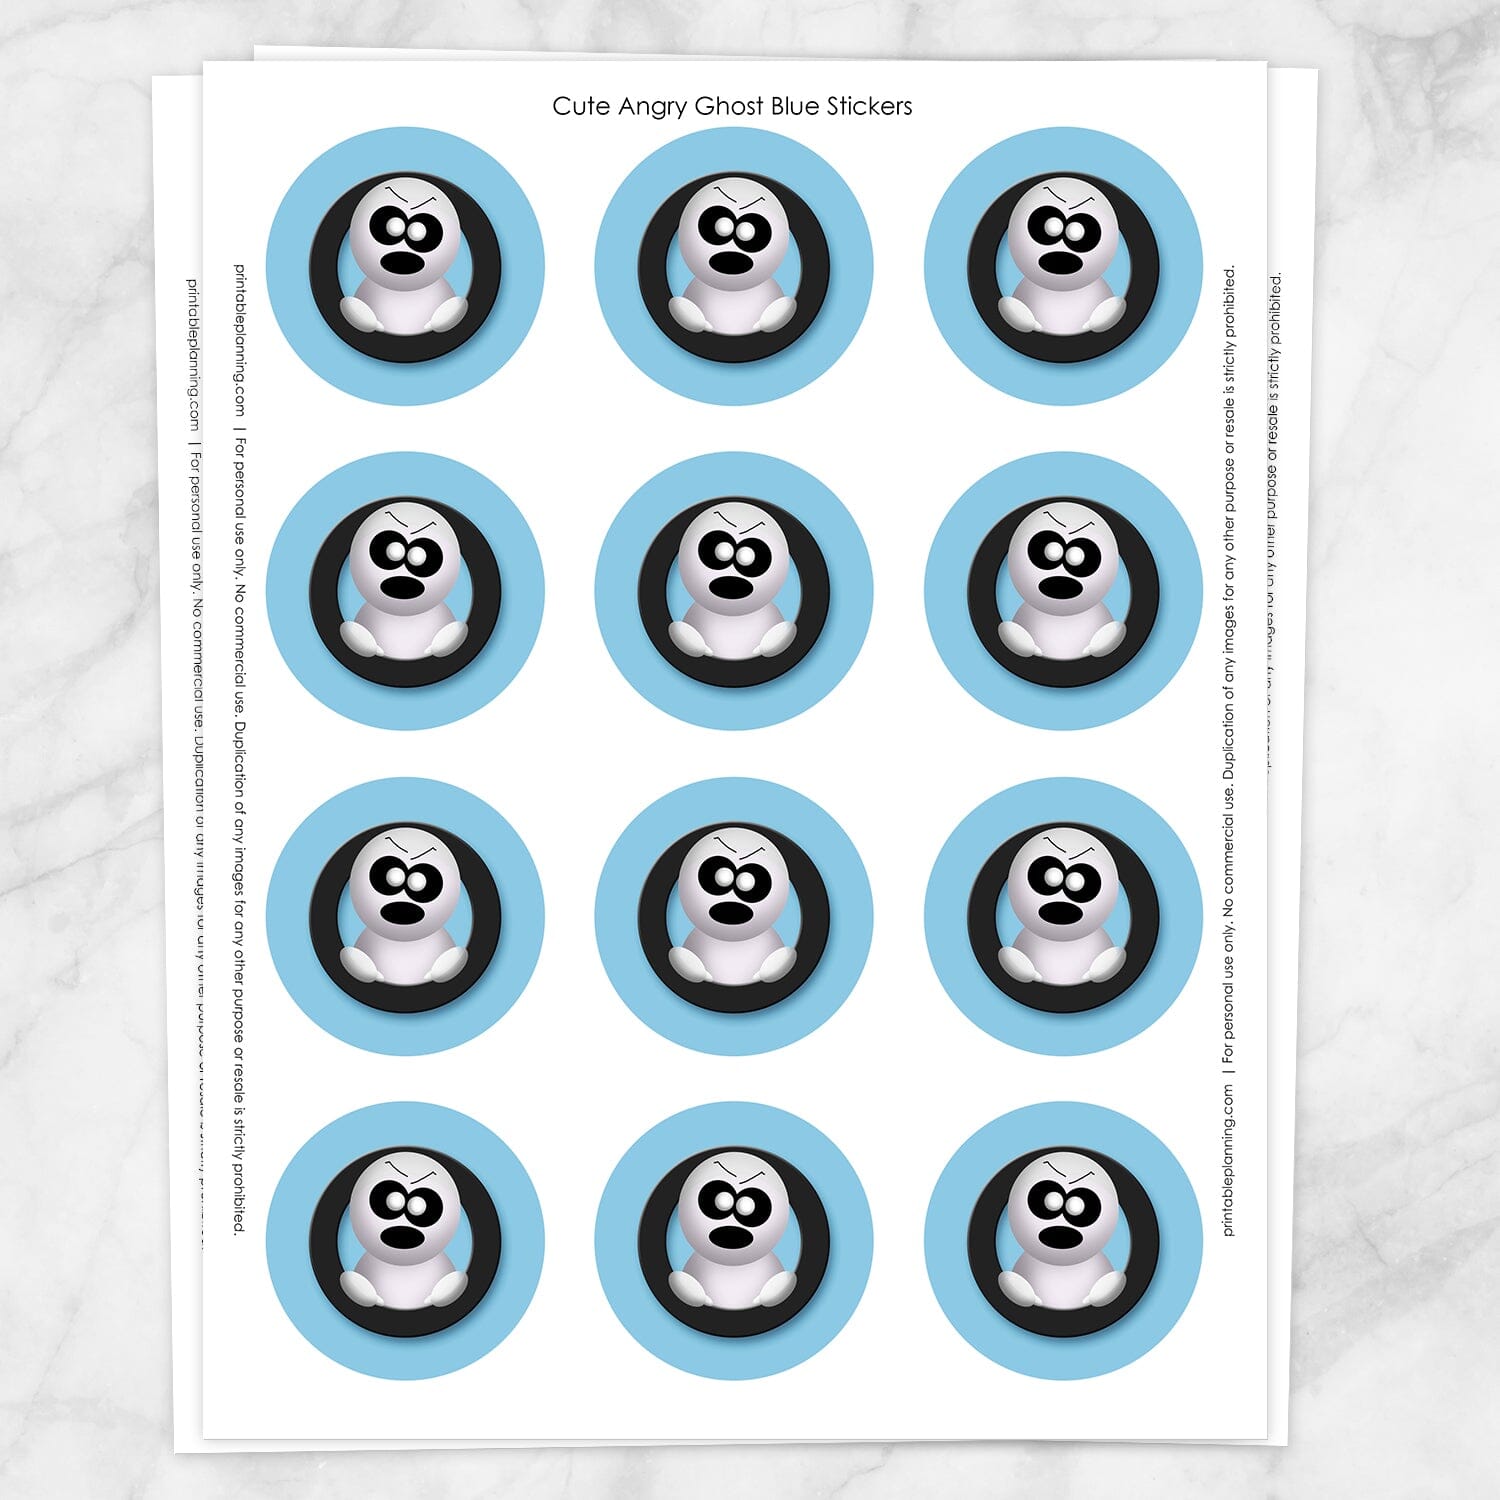 Printable Cute Angry Ghost Halloween Stickers in Blue at Printable Planning. Sheet of 12 stickers.